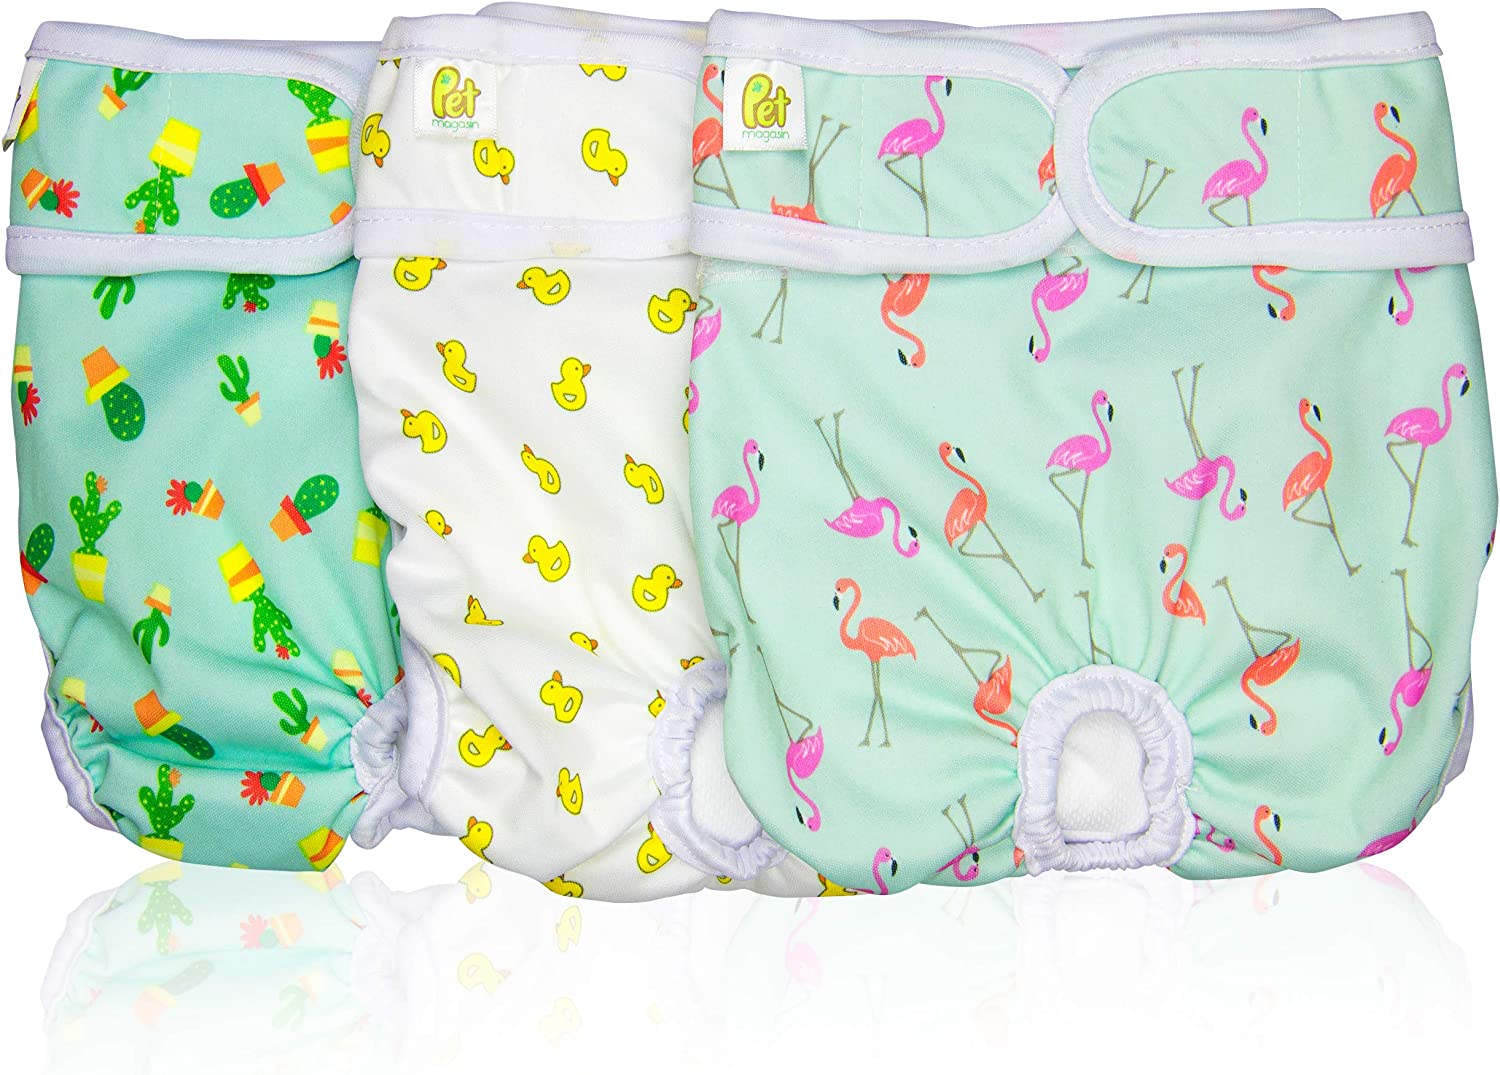 2. Pet Magasin Luxury Diapers